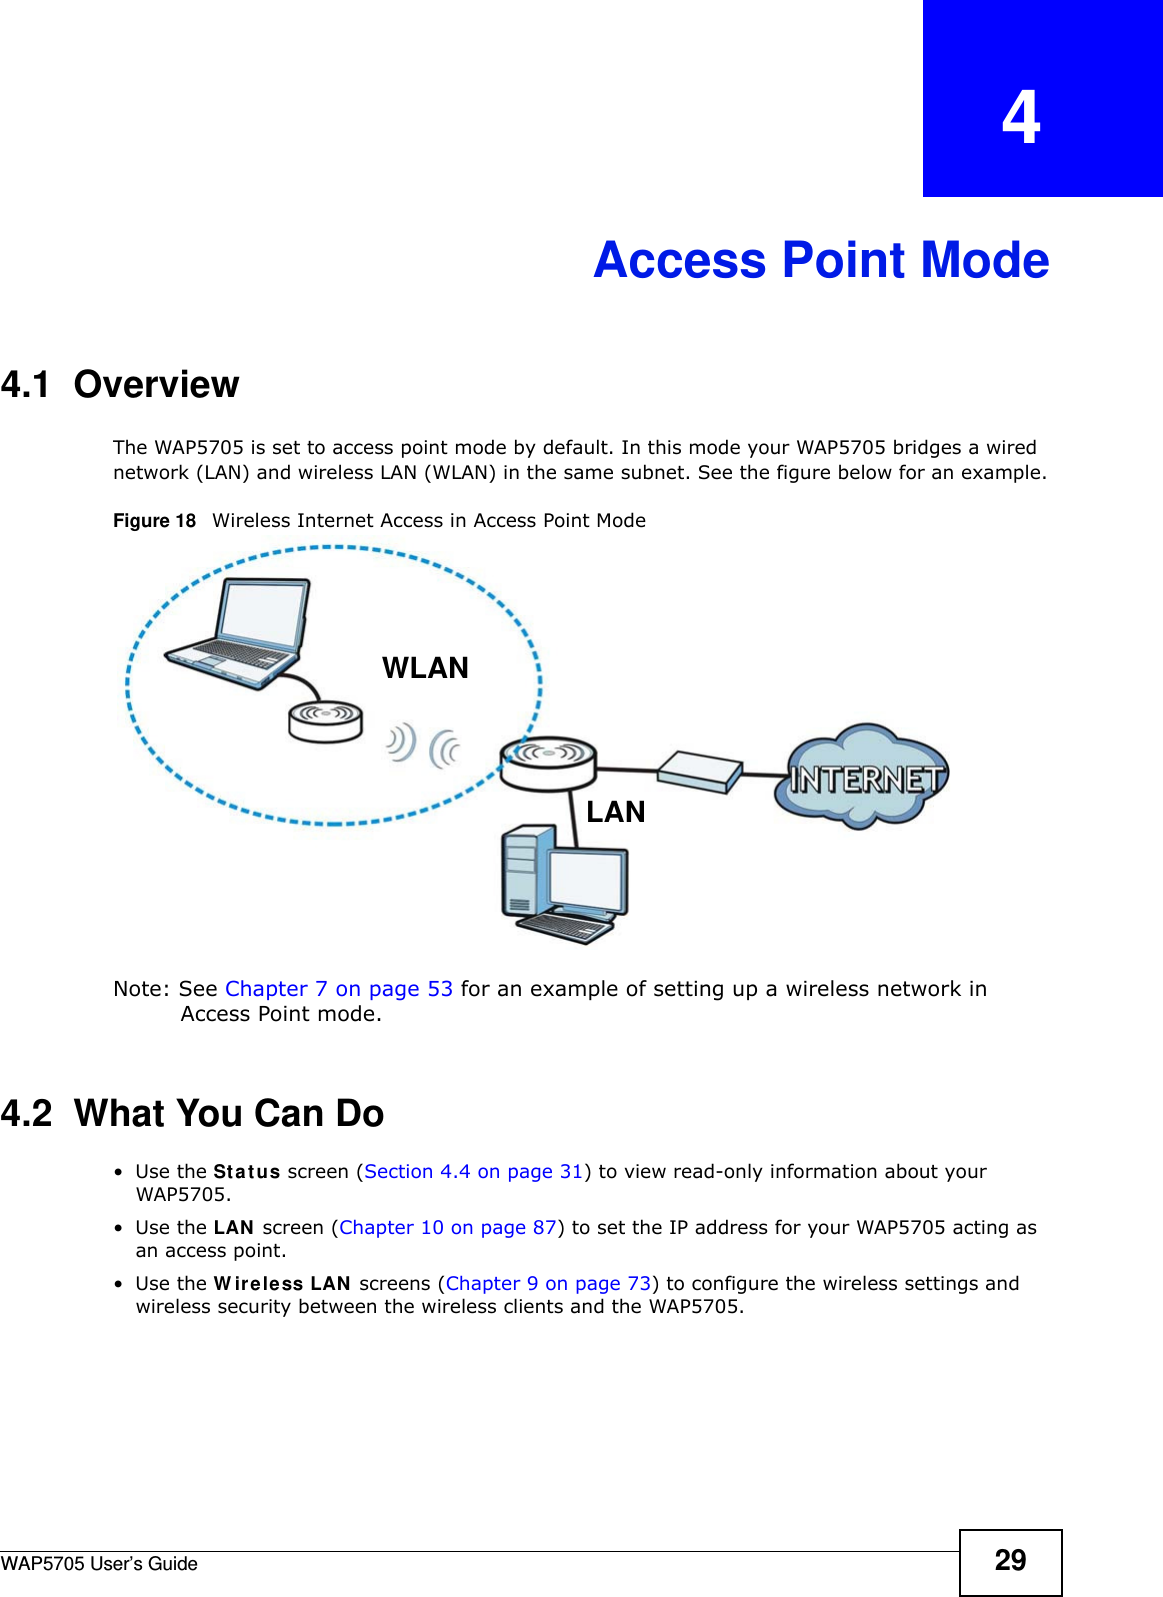 WAP5705 User’s Guide 29CHAPTER   4Access Point Mode4.1  OverviewThe WAP5705 is set to access point mode by default. In this mode your WAP5705 bridges a wired network (LAN) and wireless LAN (WLAN) in the same subnet. See the figure below for an example.Figure 18   Wireless Internet Access in Access Point Mode Note: See Chapter 7 on page 53 for an example of setting up a wireless network in Access Point mode. 4.2  What You Can Do•Use the St a t us screen (Section 4.4 on page 31) to view read-only information about your WAP5705.•Use the LAN  screen (Chapter 10 on page 87) to set the IP address for your WAP5705 acting as an access point.•Use the W ir e le ss LAN screens (Chapter 9 on page 73) to configure the wireless settings and wireless security between the wireless clients and the WAP5705.WLANLAN